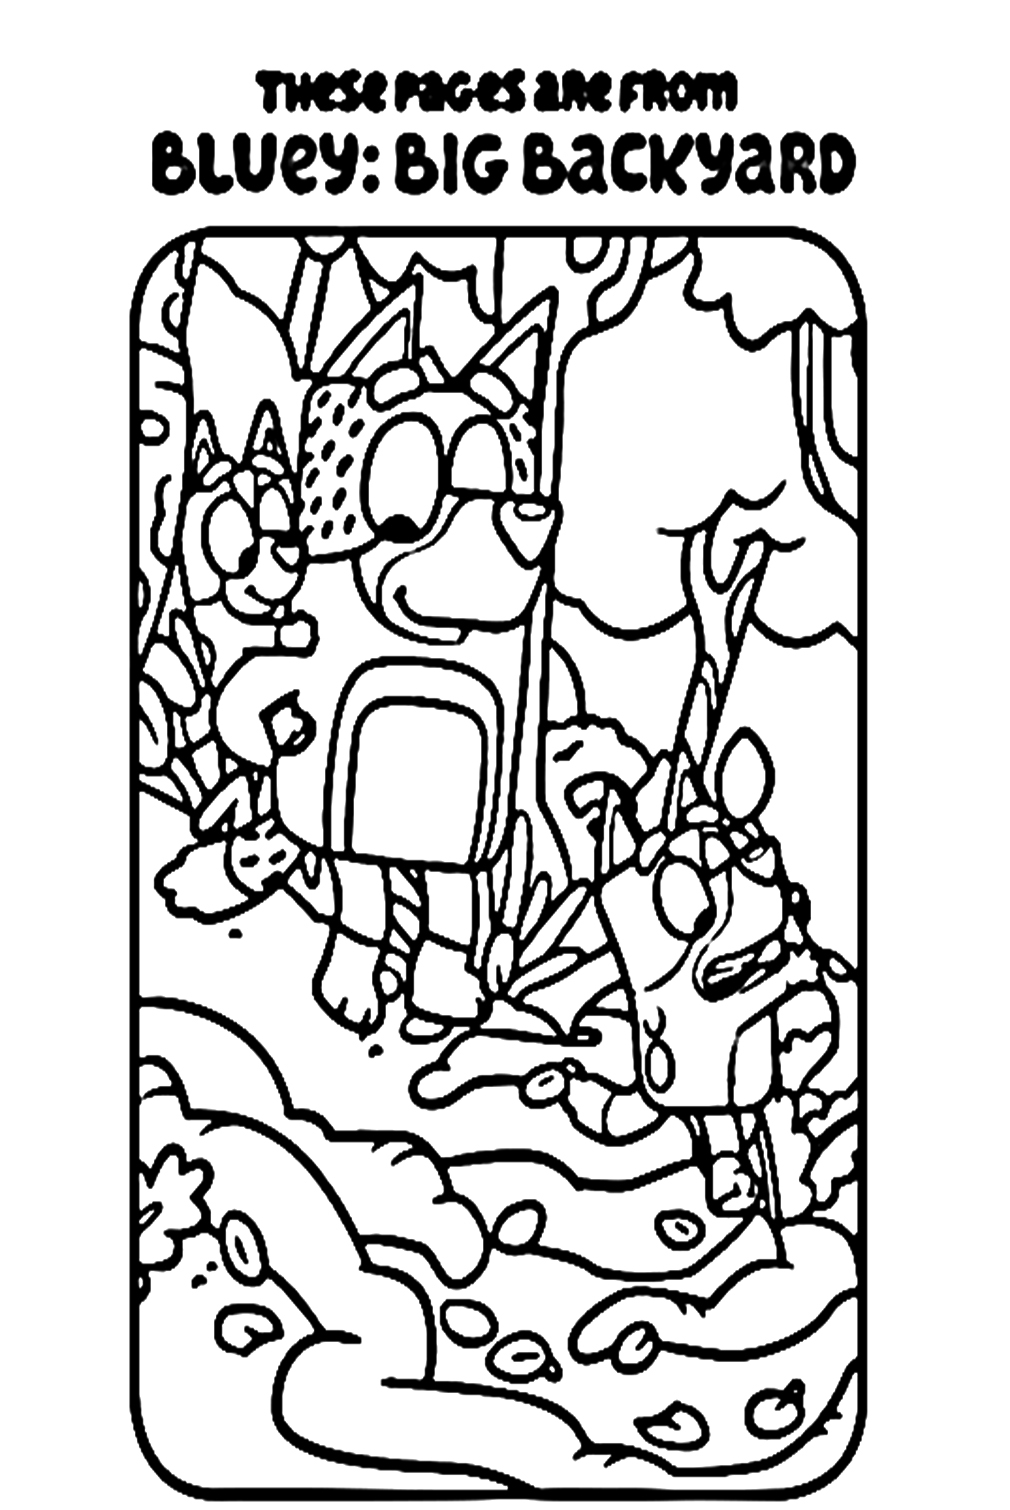 Bluey Car Coloring Page